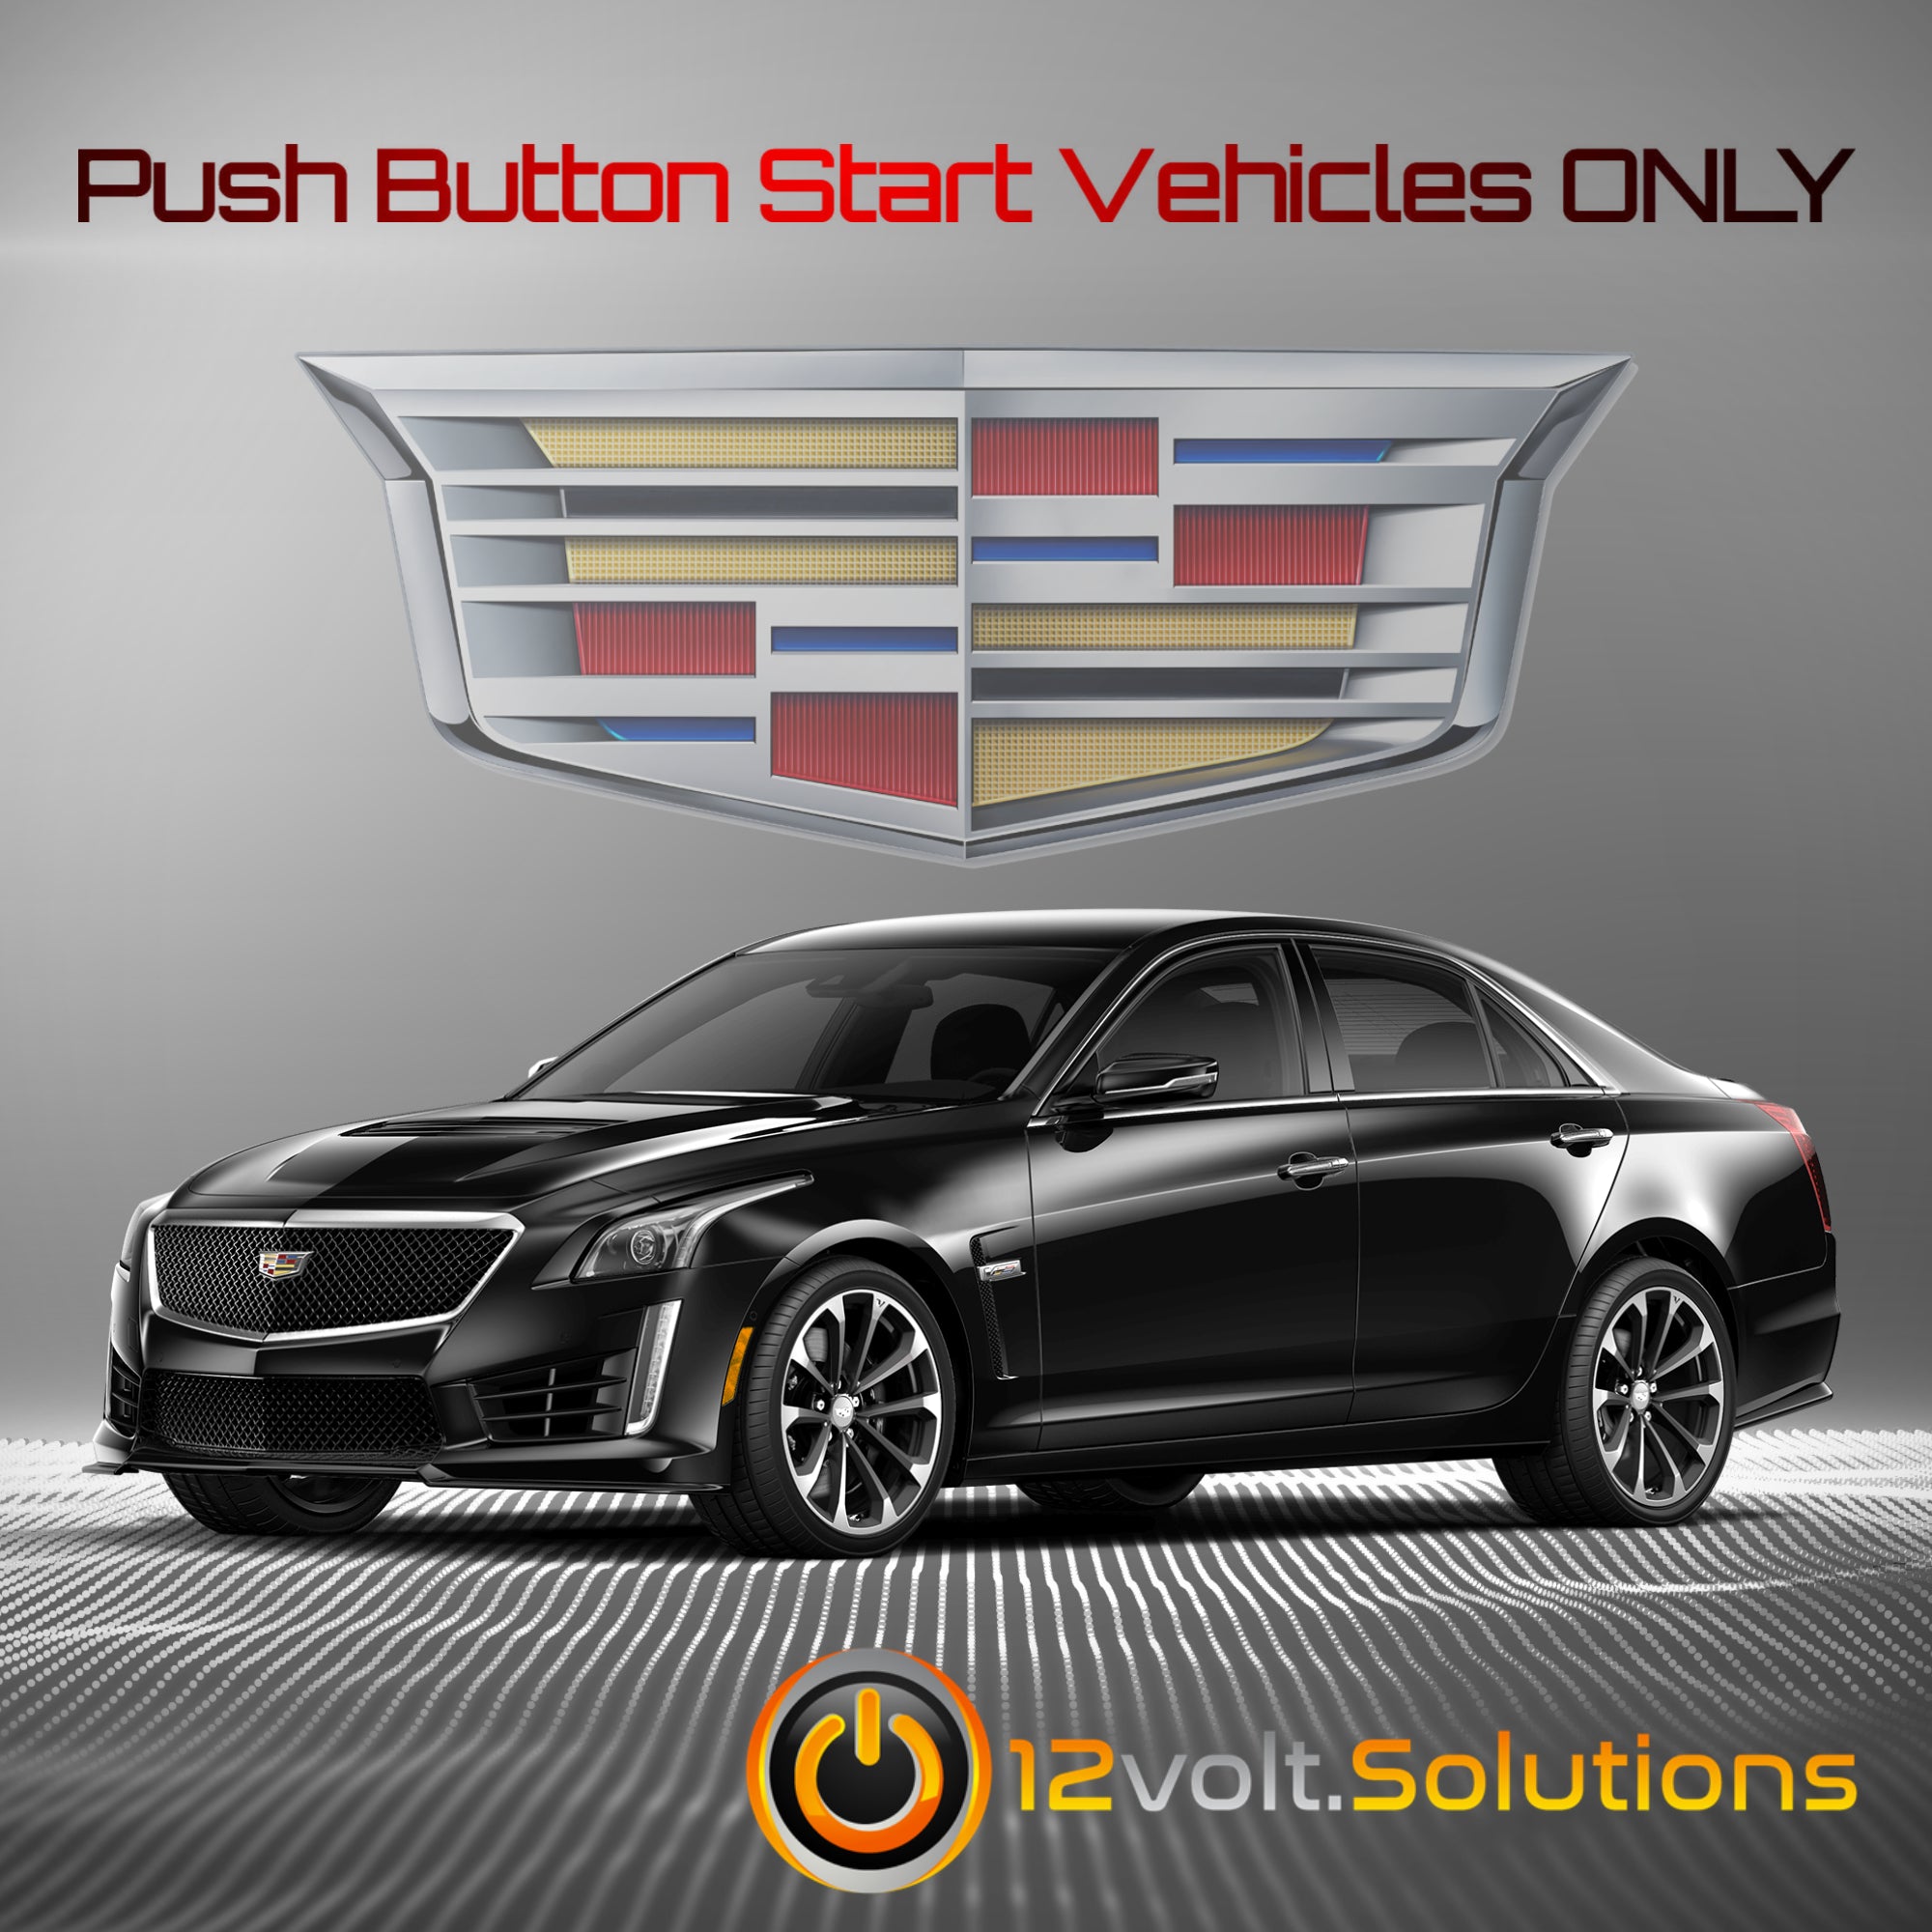 2014-2019 Cadillac CTS Plug and Play Remote Start Kit (Push Button Start)-12Volt.Solutions